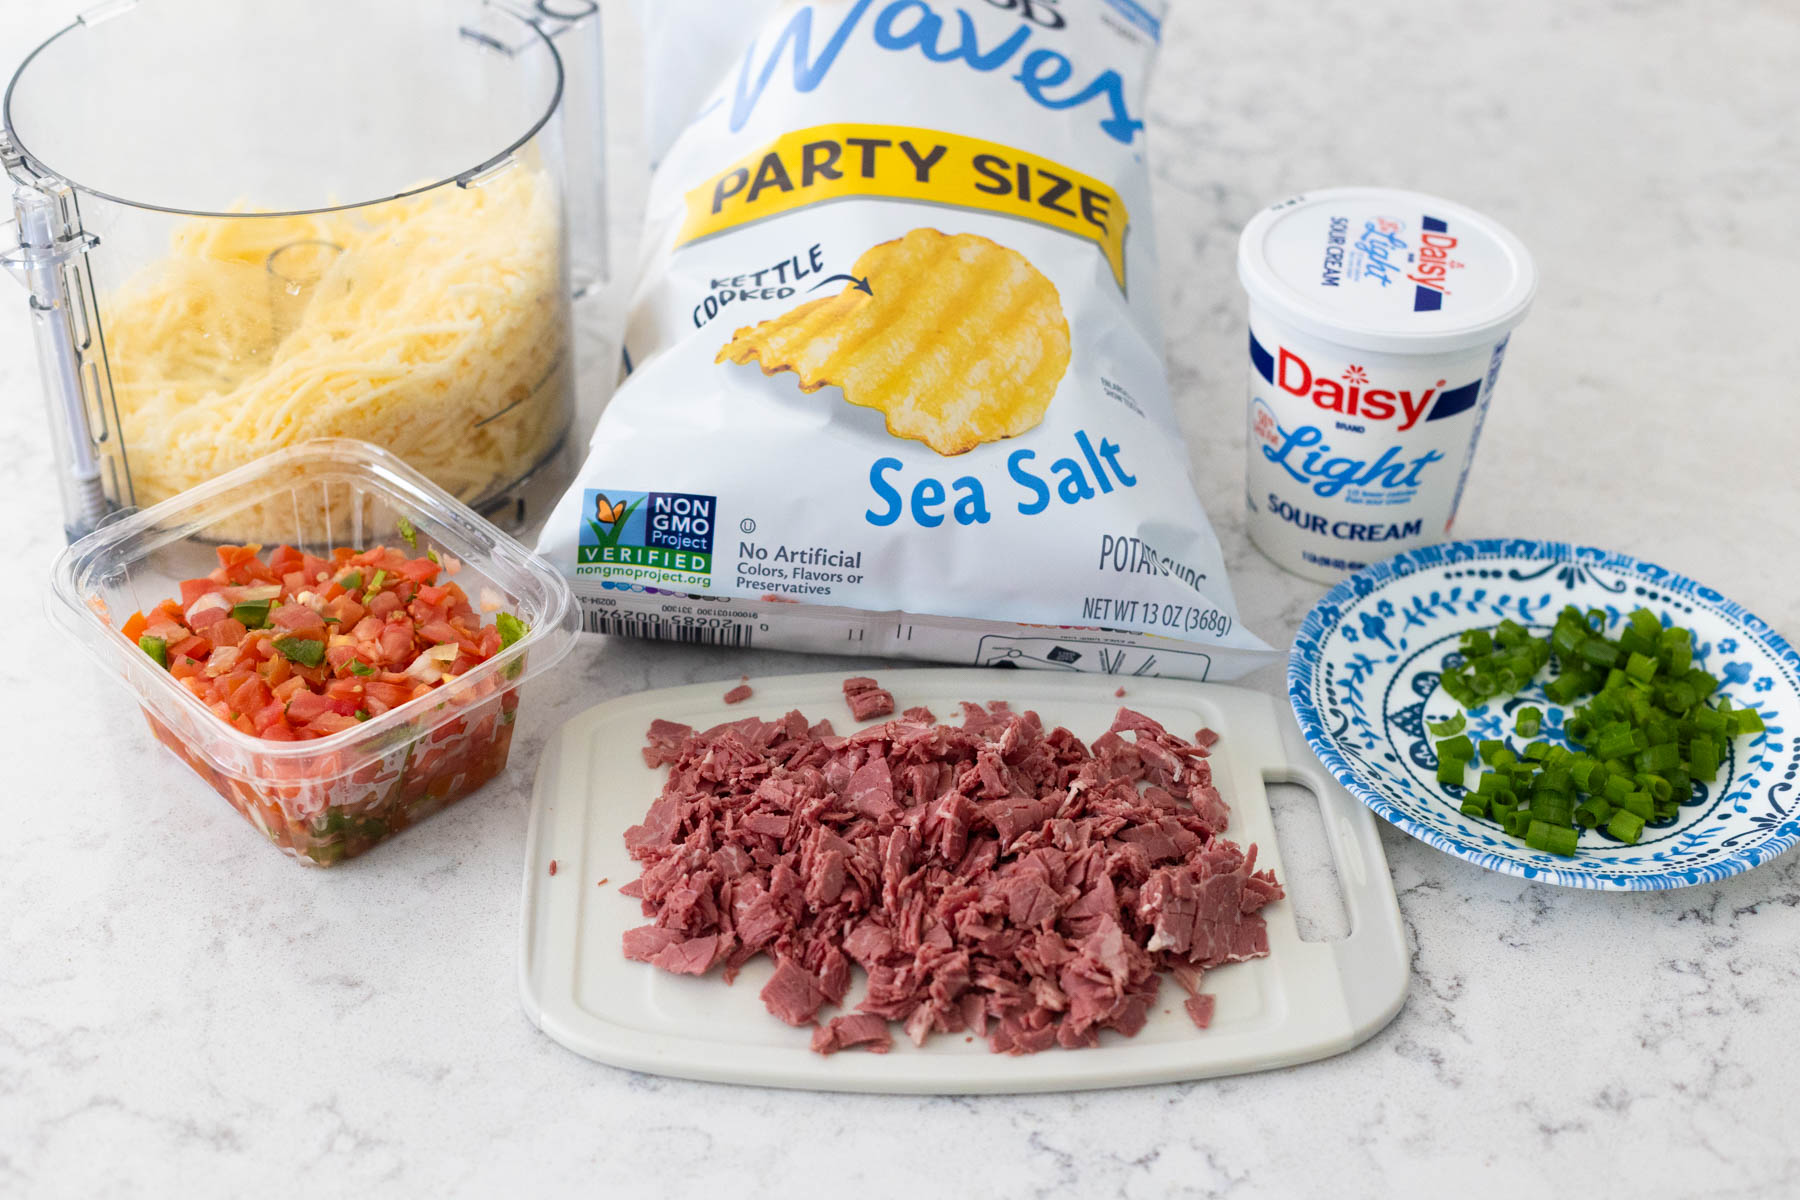 The ingredients to make Irish nachos are on the counter.